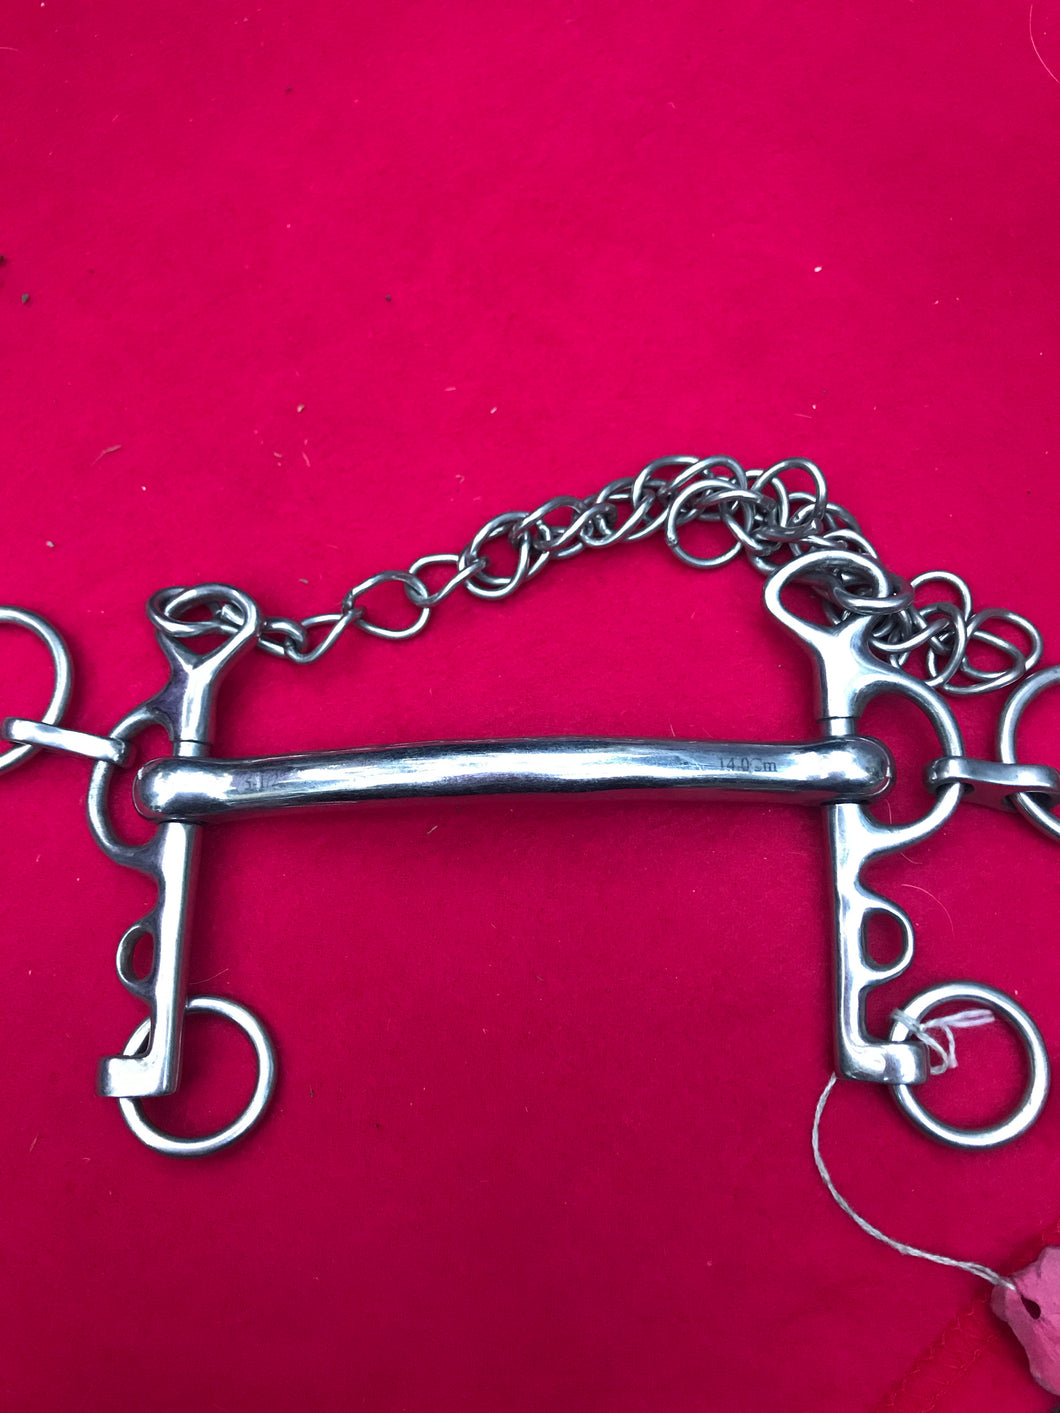 51/2”. Mullen Rugby Pelham: with chain. FREE POSTAGE